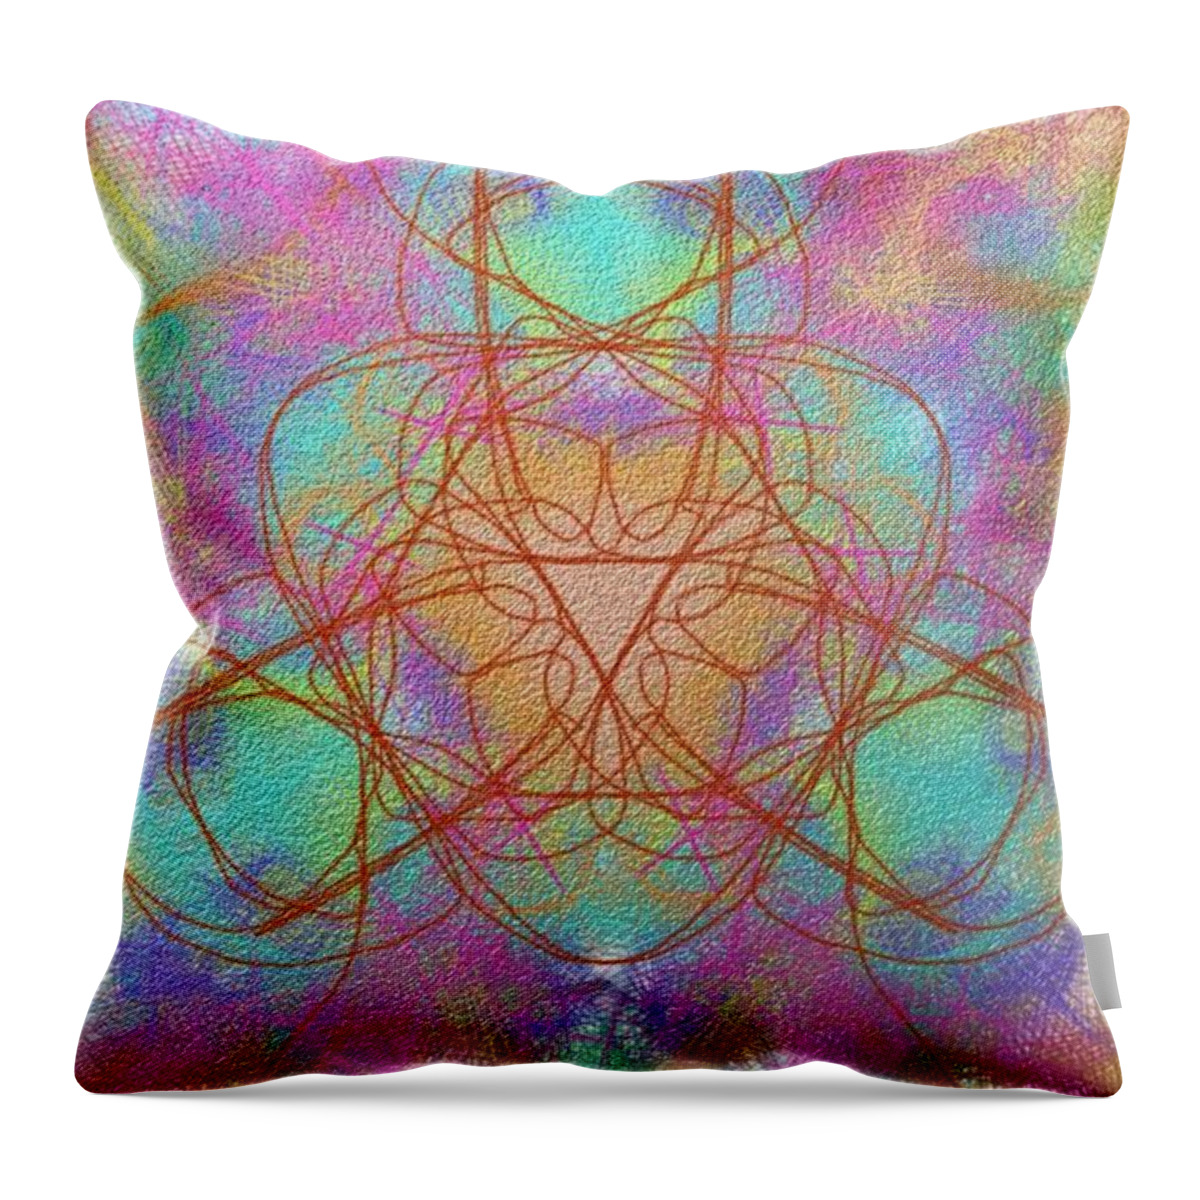 Mandala Throw Pillow featuring the painting Inner Chamber by Naomi Jacobs